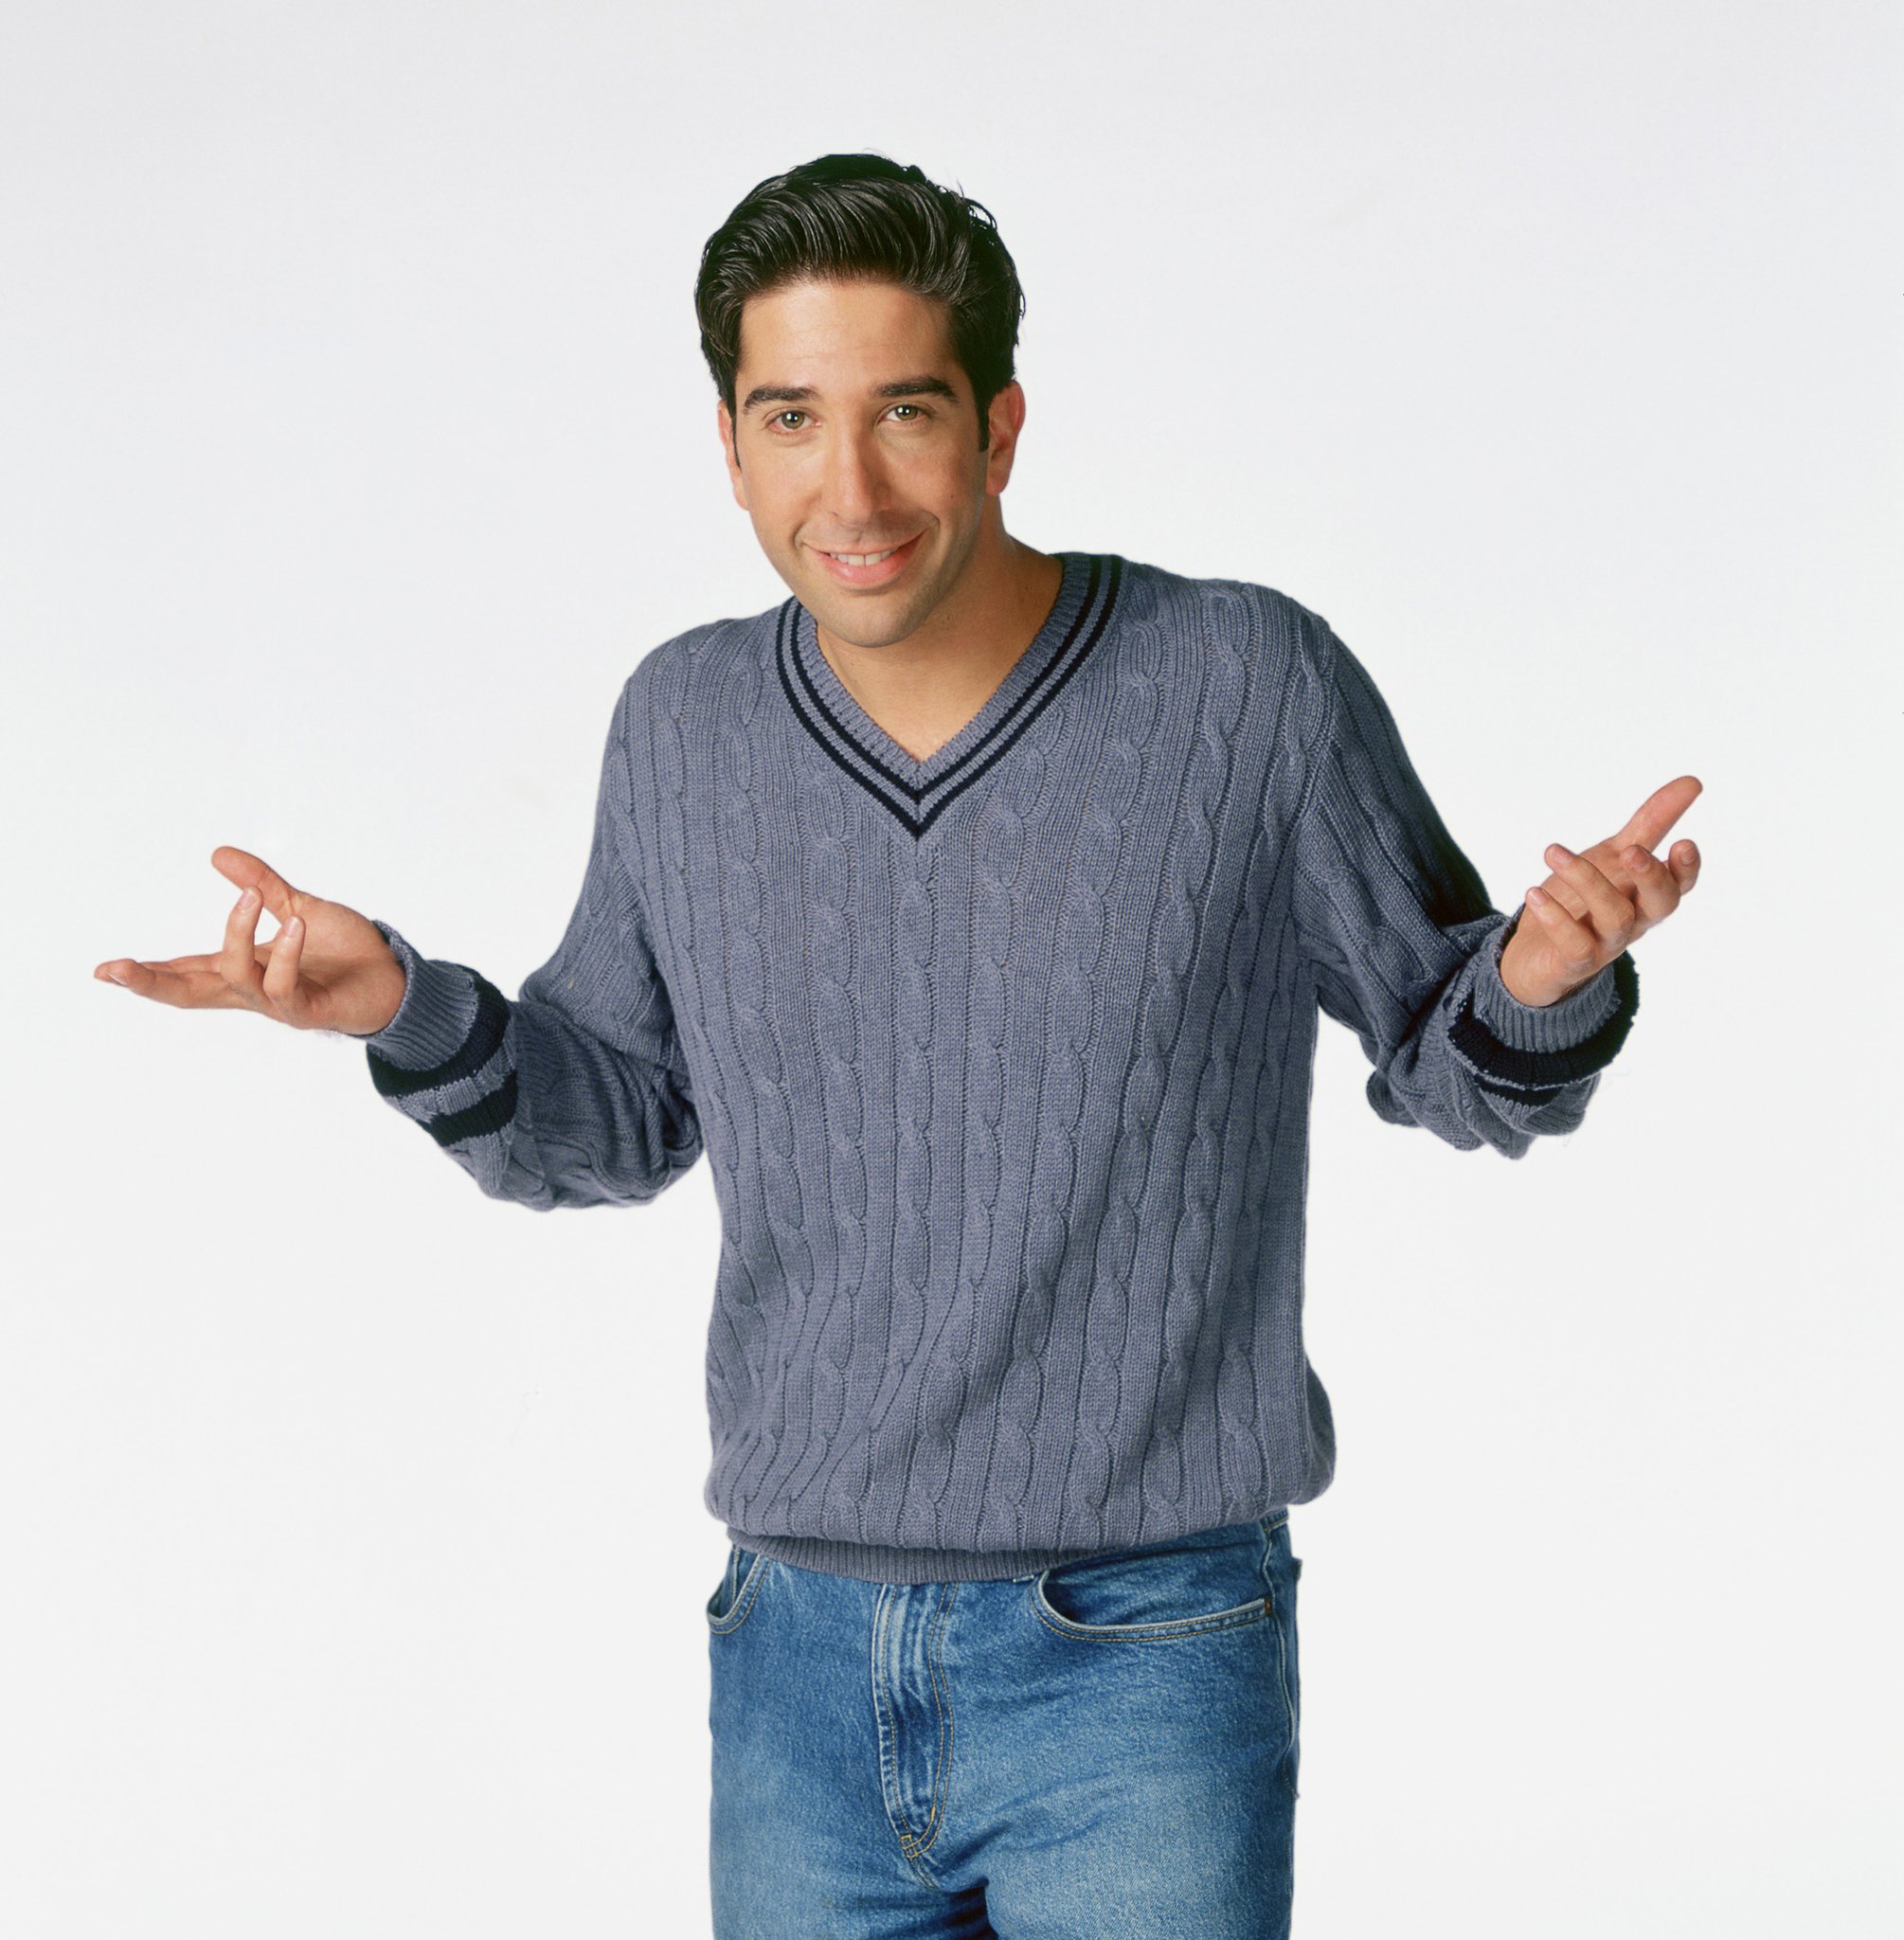 Wow Ross from friends (David Schwimmer) has birthday today!
Happy 51st birthday dude! 